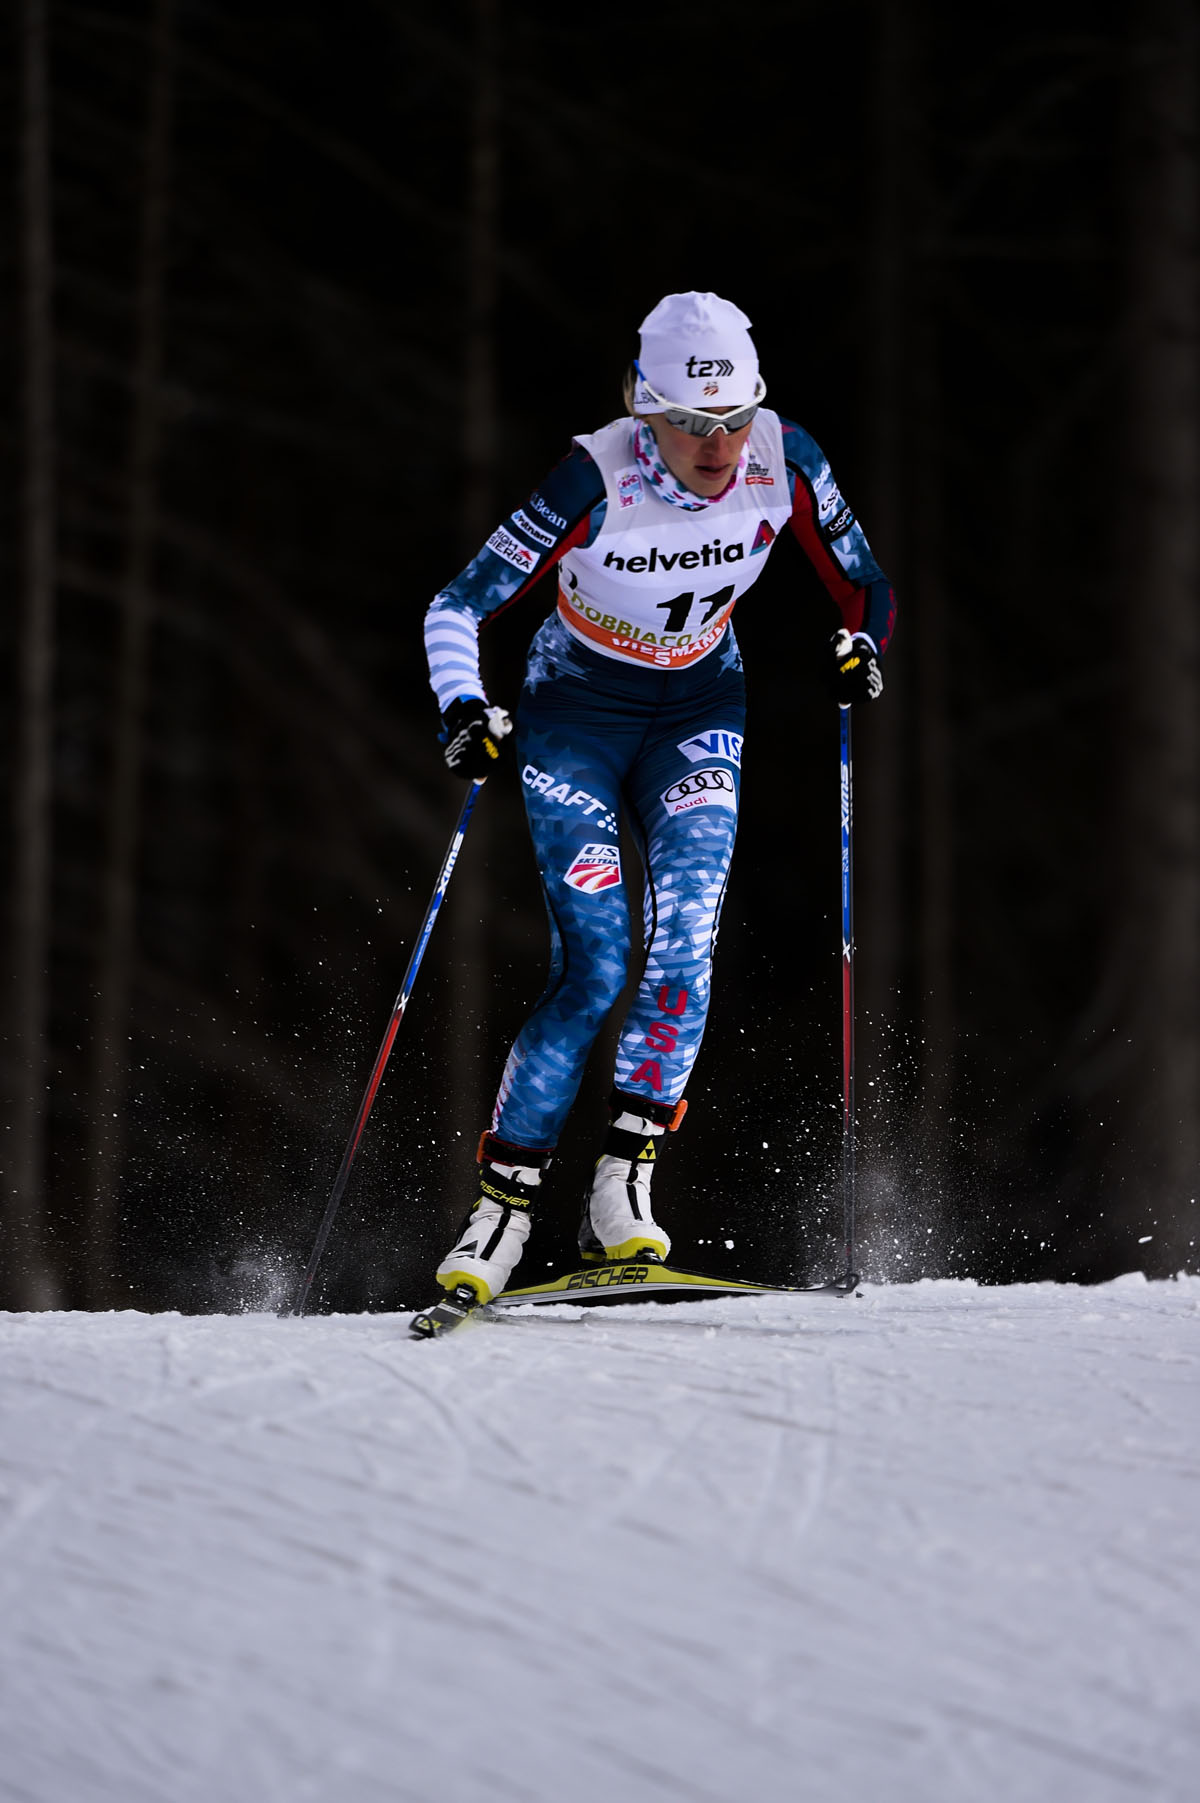 American Sophie Caldwell racing to 15th in the women's 1.3 k freestyle sprint qualifier at the World Cup in Toblach, Italy.(Photo: Fischer/NordicFocus)